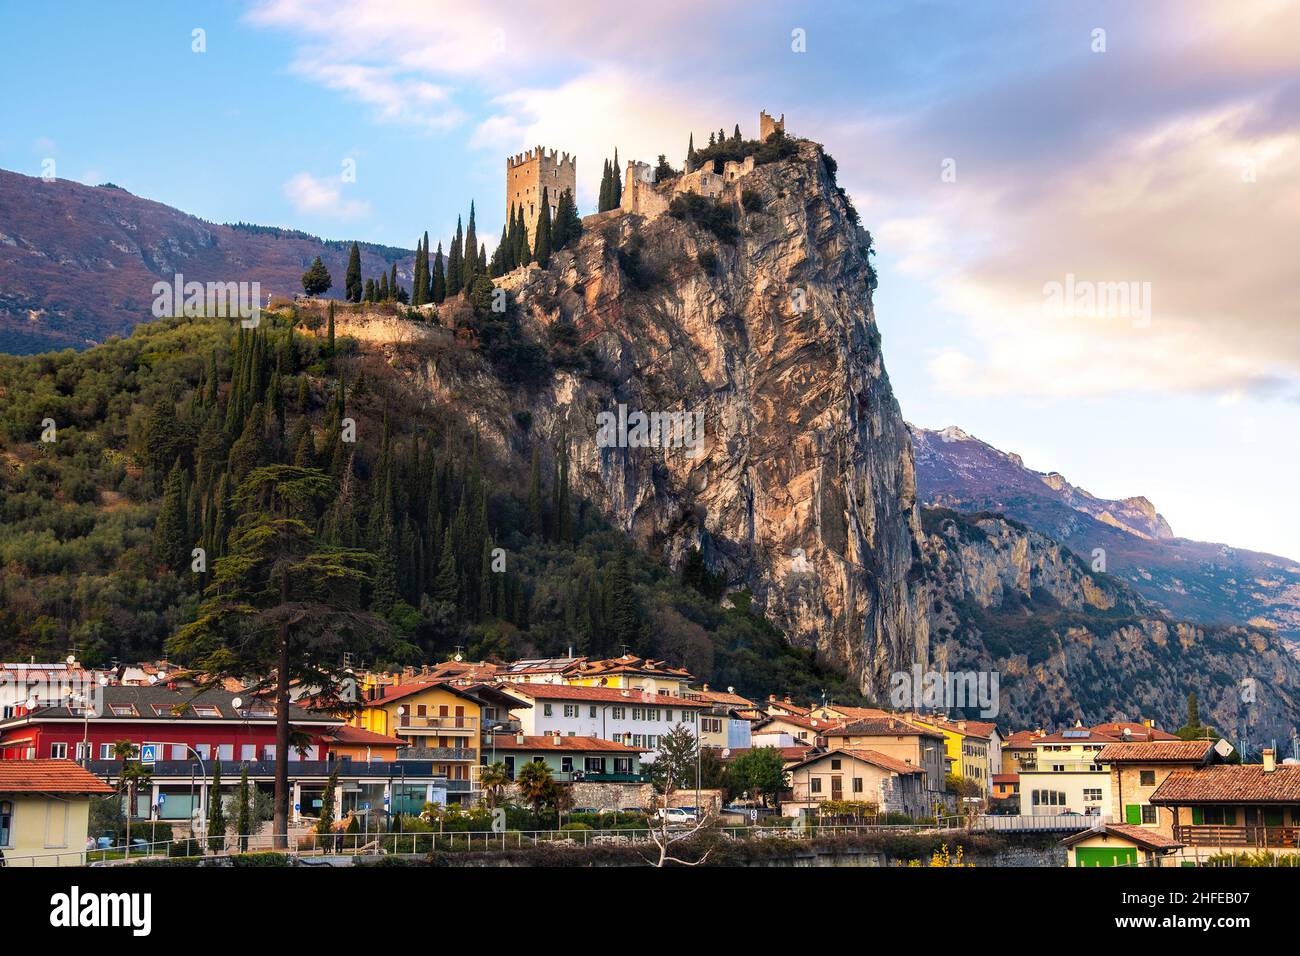 Arco city with castle on rocky cliff in Trentino Alto adige - province of Trento - Italy landmarks Stock Photo